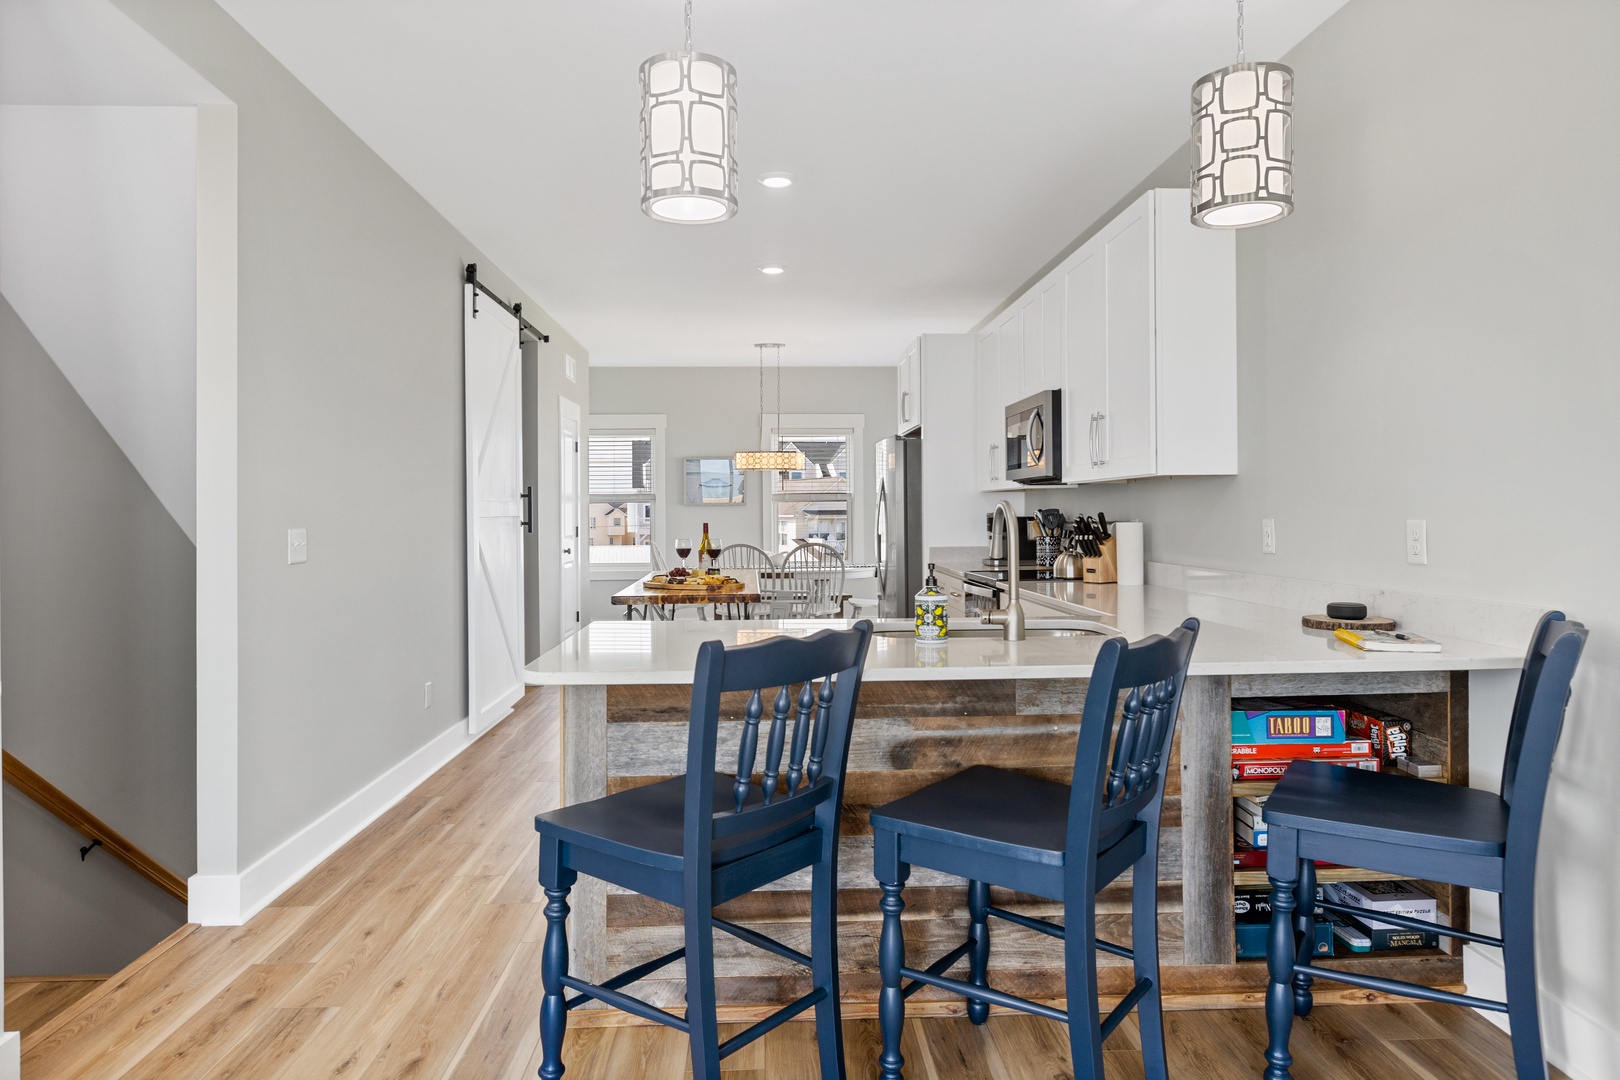 The well-stocked kitchen with countertop seating for 3 and island seating for 4